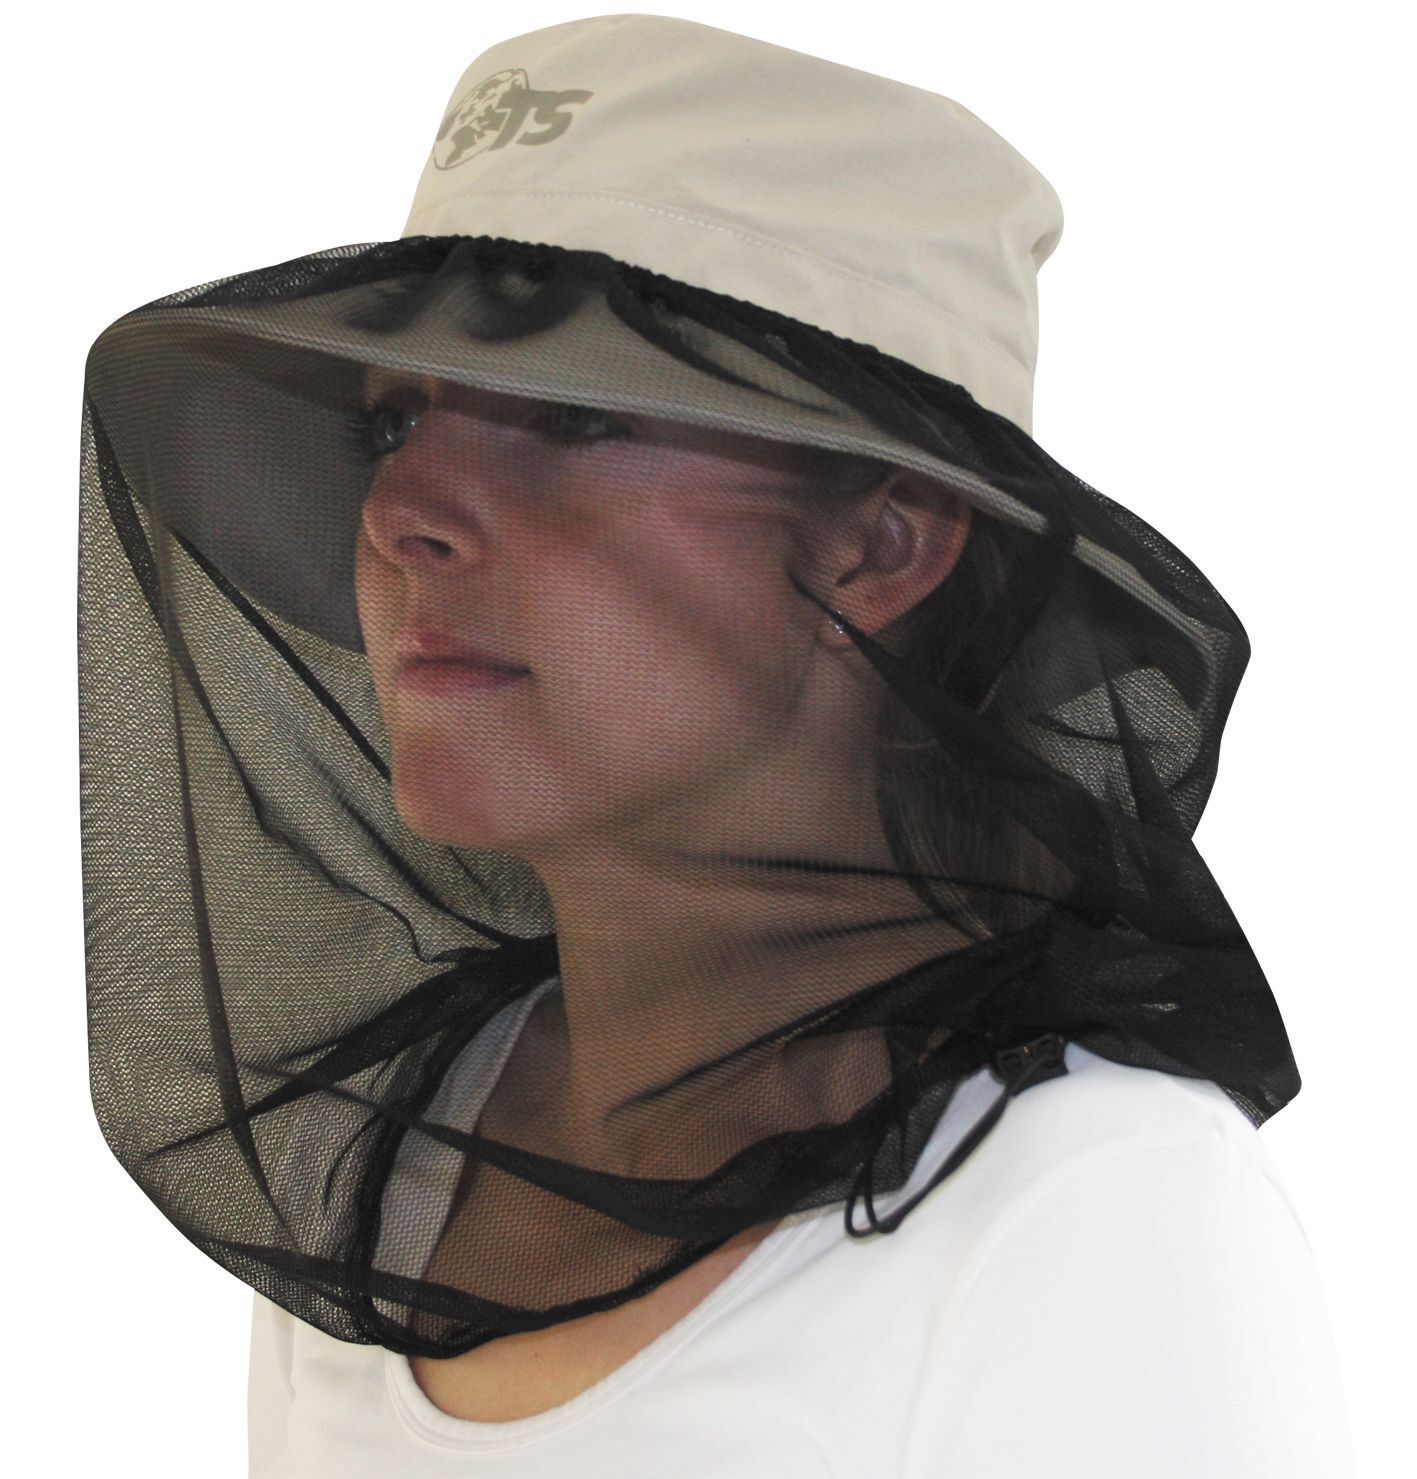 Travelsafe Mosquito Sunhat - Beige Sun Hat with Integral Net